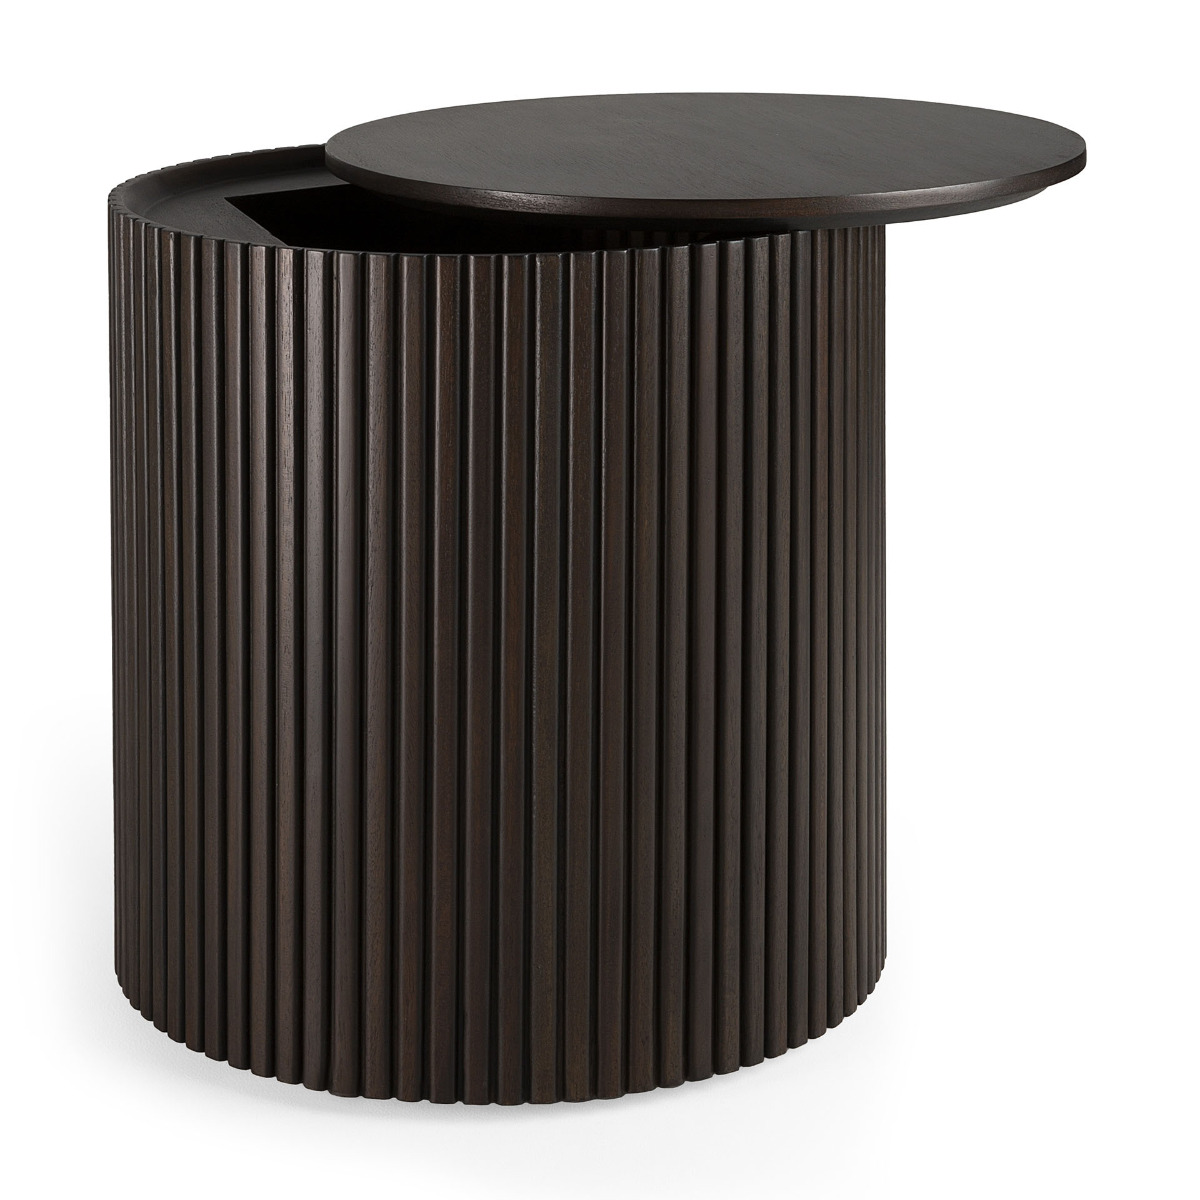 Mahogany Roller Max dark brown round side table